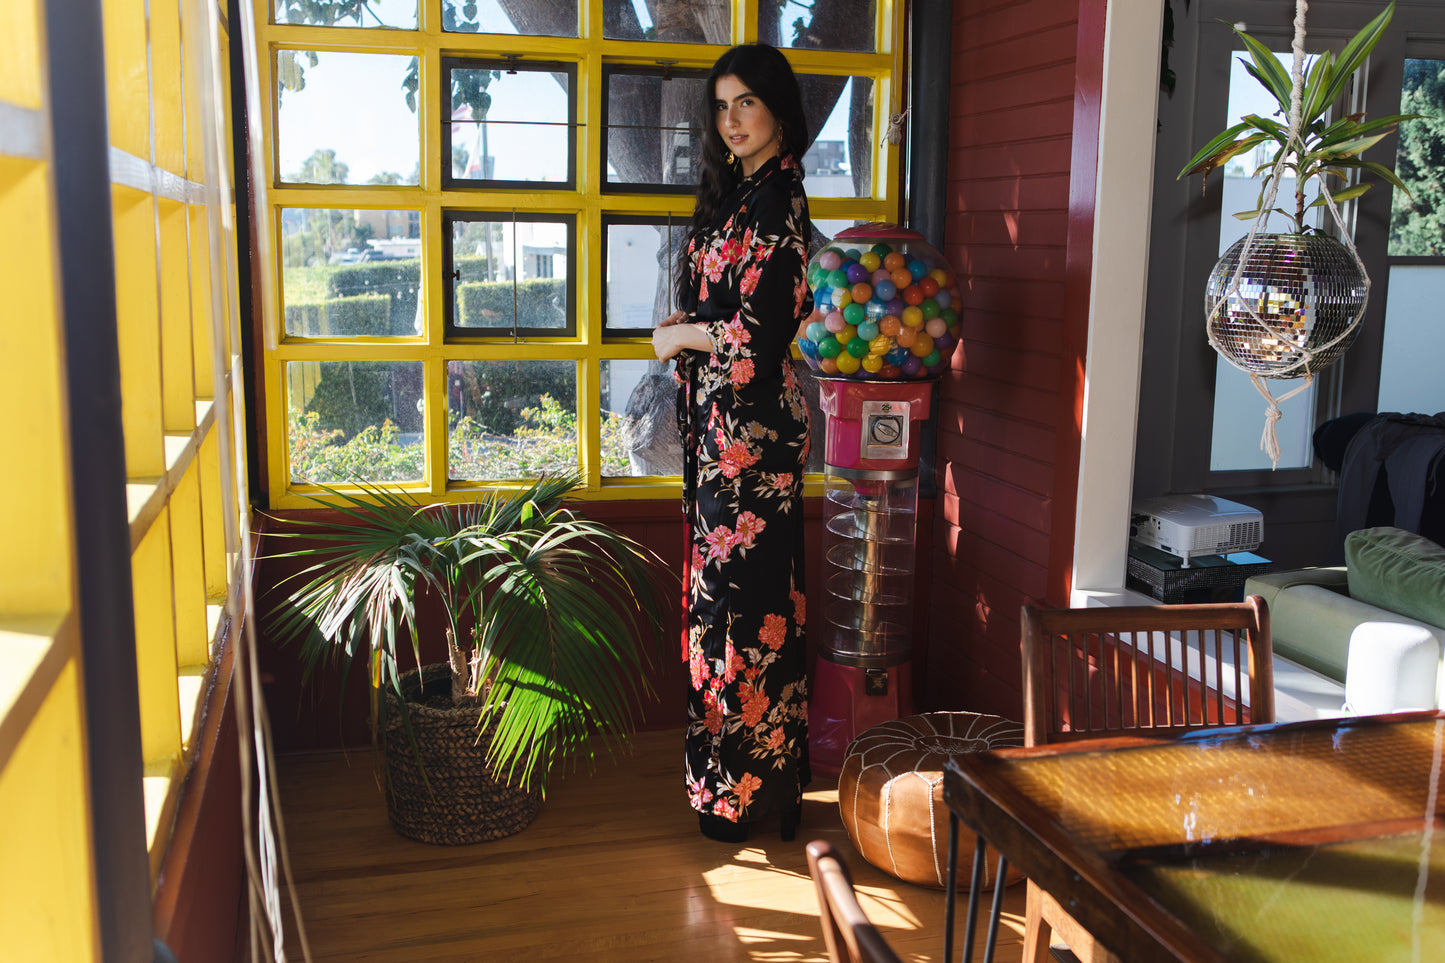 jennafer grace Harlowe dolman palazzo set silky black georgette with vibrant pink red orange floral print matching co-ord coord set wrap blouse top with tasseled belt and palazzo pant with pockets and elastic waist boho bohemian hippie romantic whimsical glamorous pajamas pjs glam lounge wear handmade in california usa